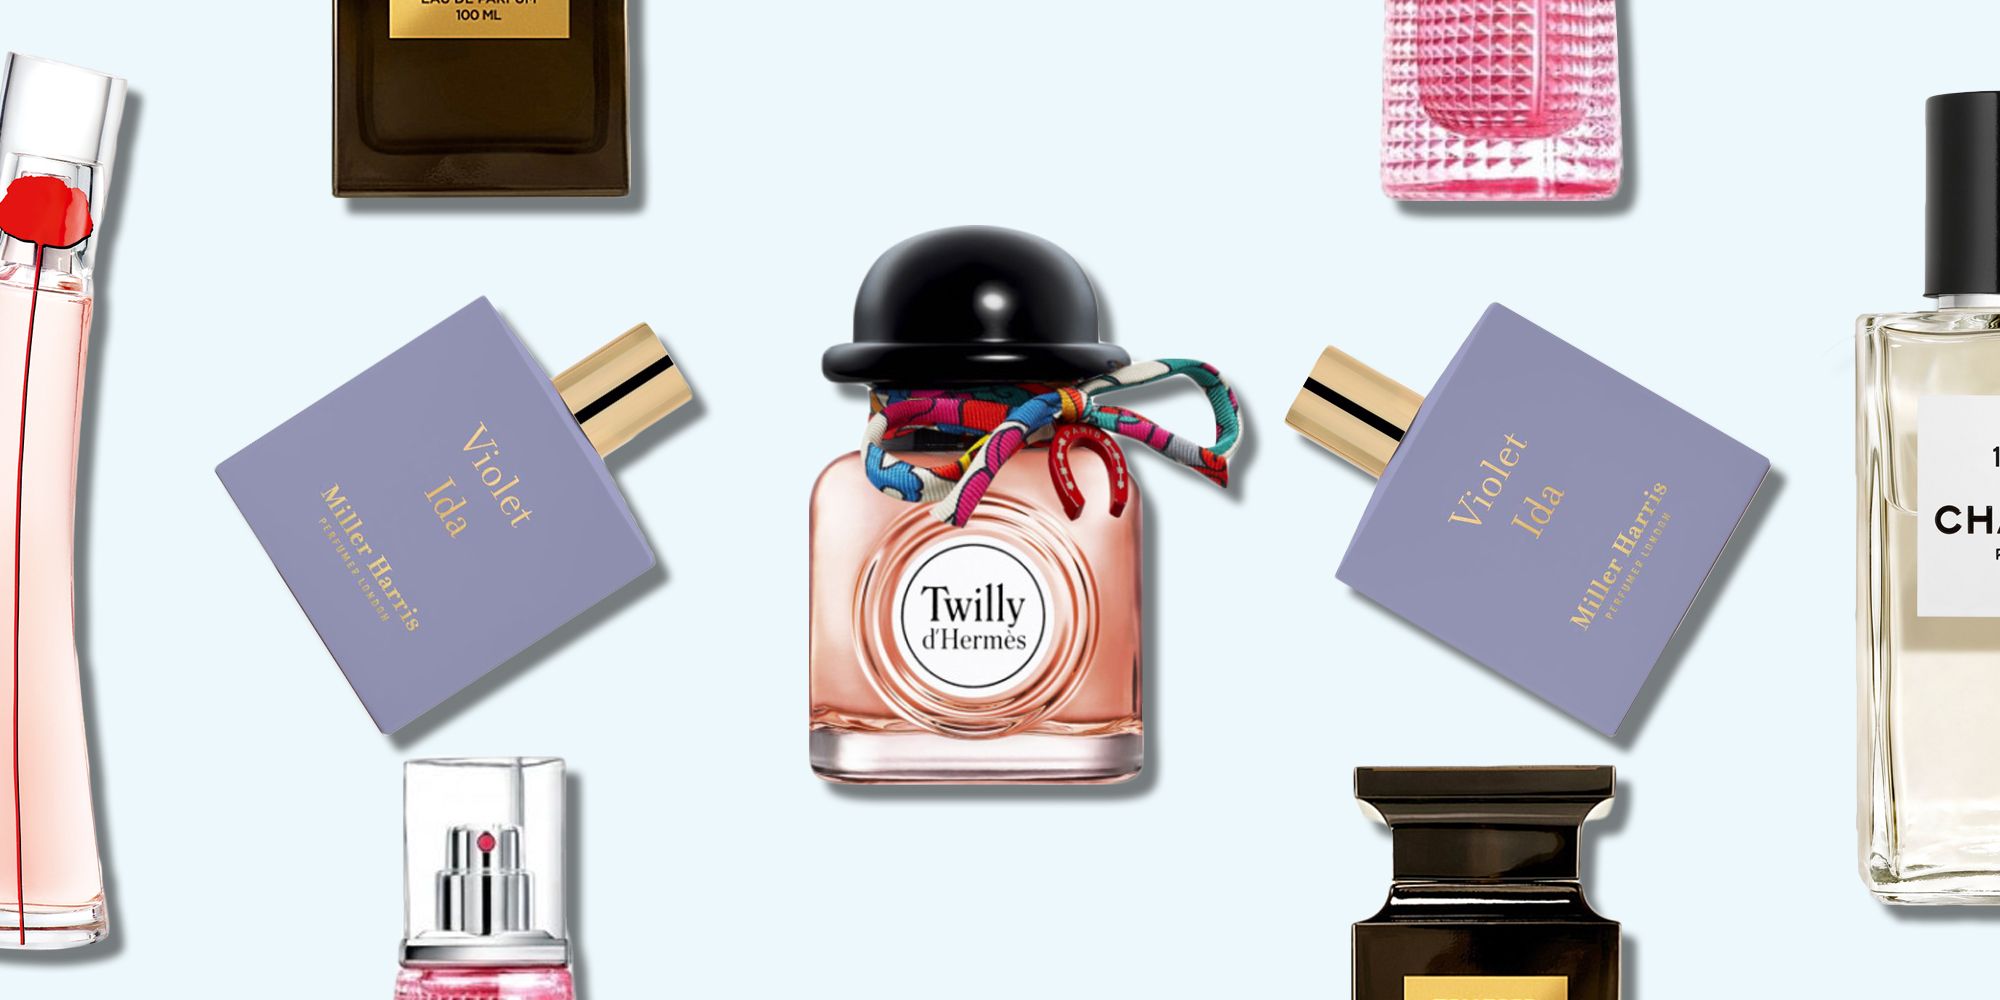 Black Friday Perfume Deals 2020: The 